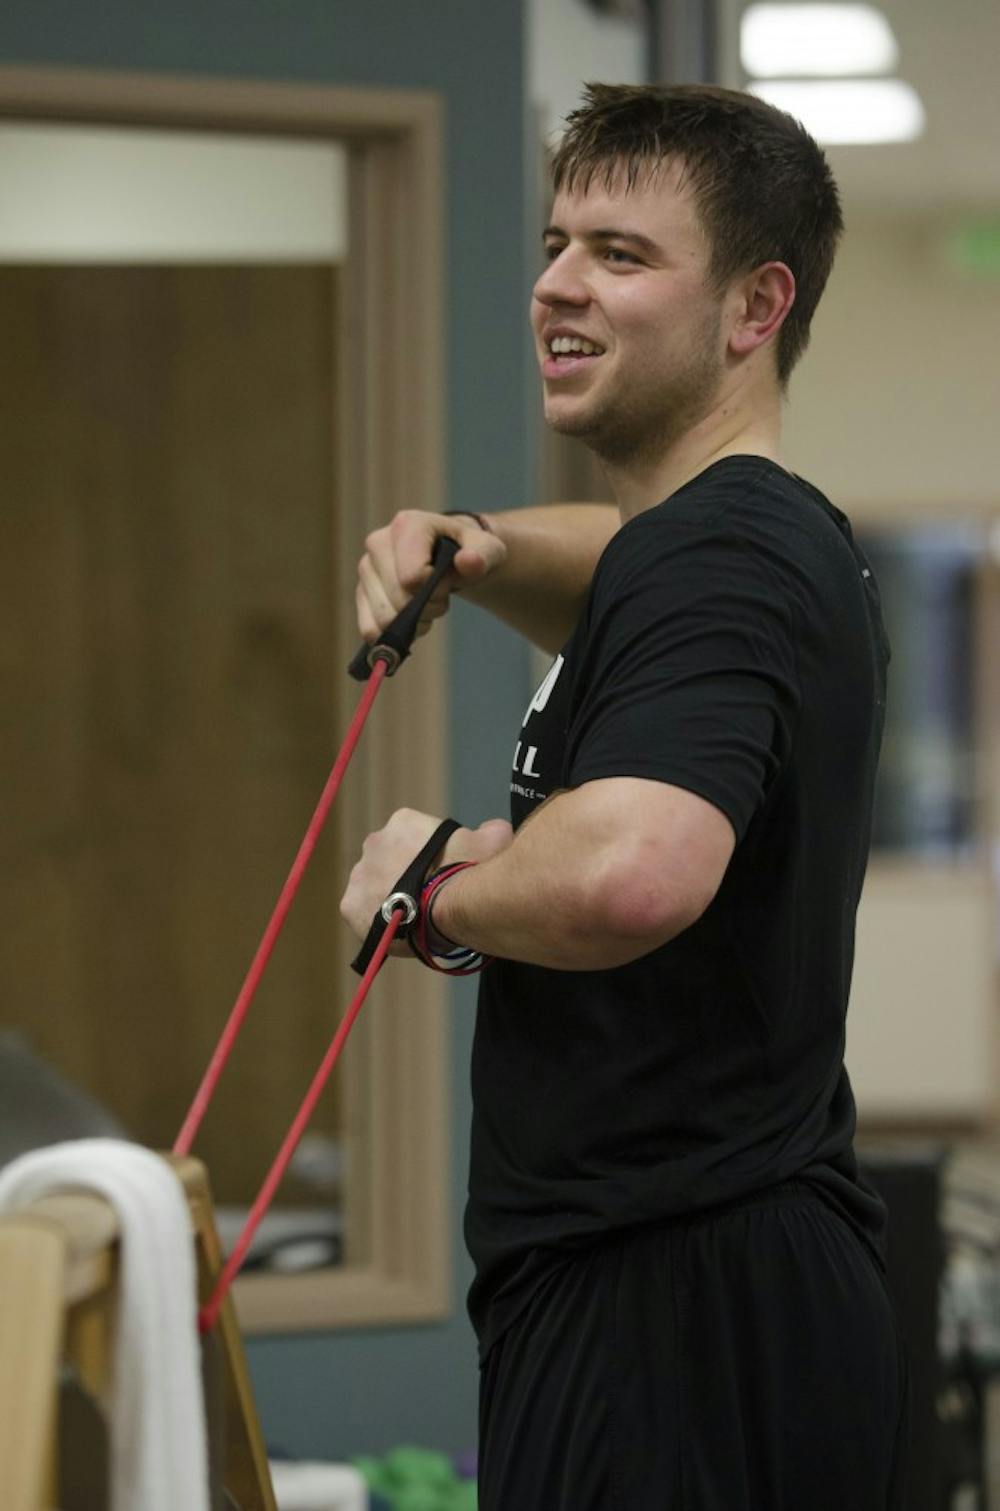 Keith Wenning works with a resistance band to stretch his arms on Feb. 1 at the St. Vincent Sports Performance Center in Indianapolis, IN. Wenning is training for the NFL Combine on Feb. 22-25. DN FILE PHOTO BREANNA DAUGHERTY